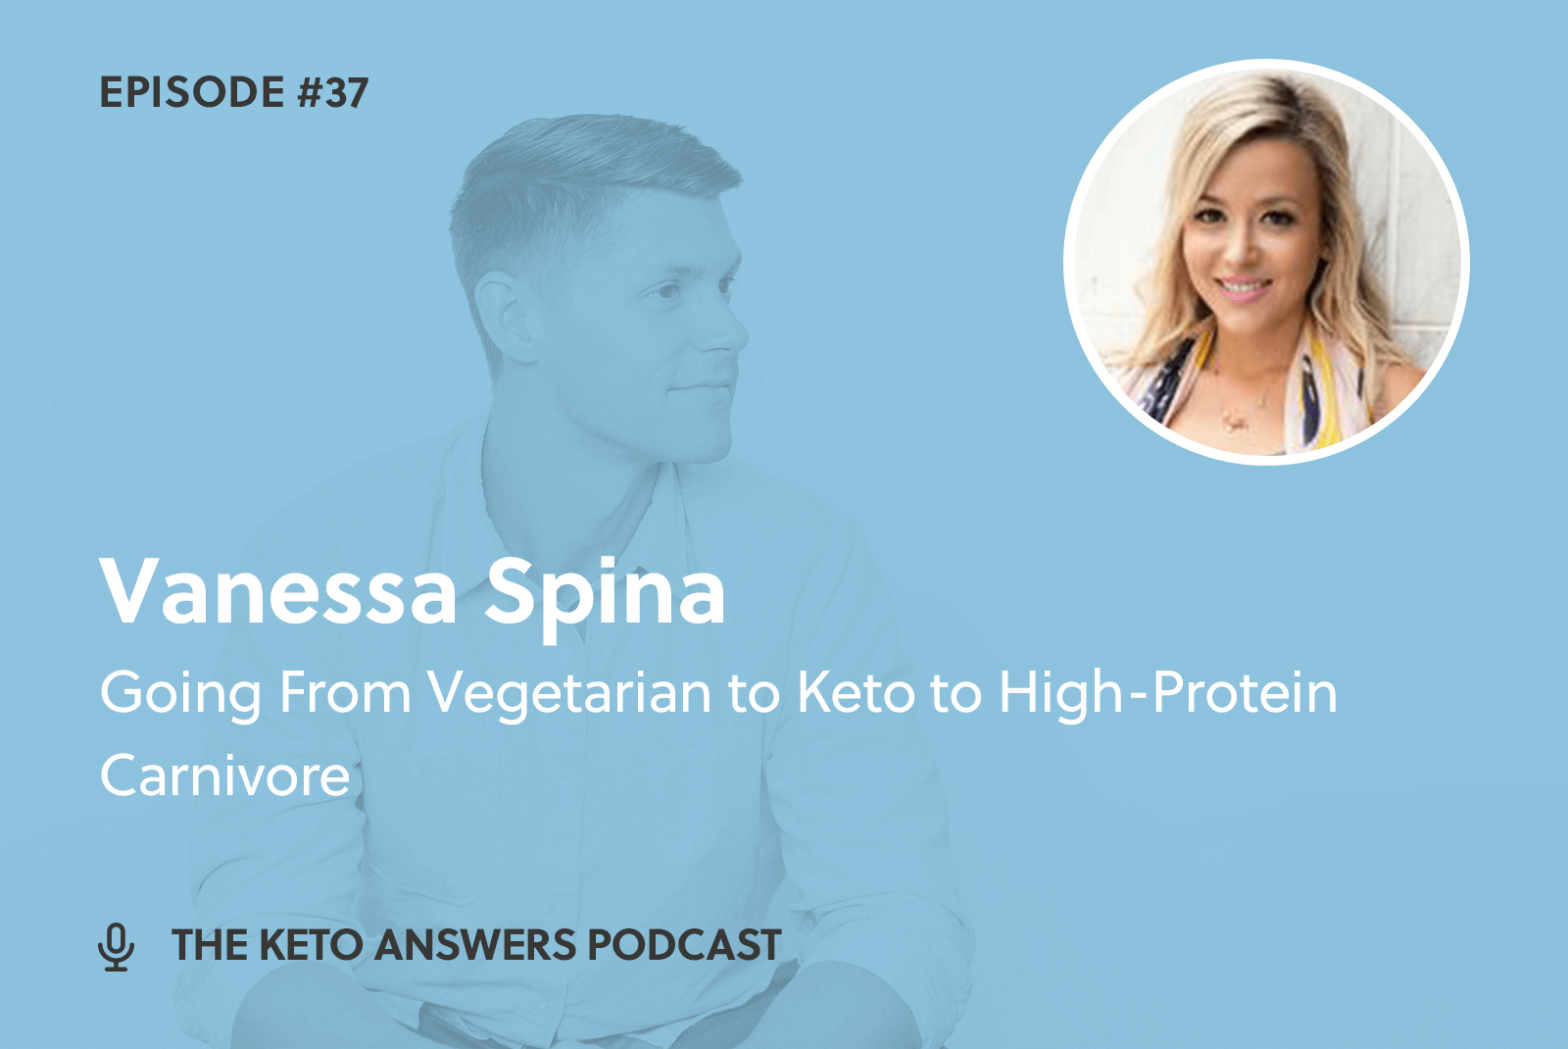 037: Vanessa Spina - Going From Vegetarian to Keto to High-Protein Carnivore